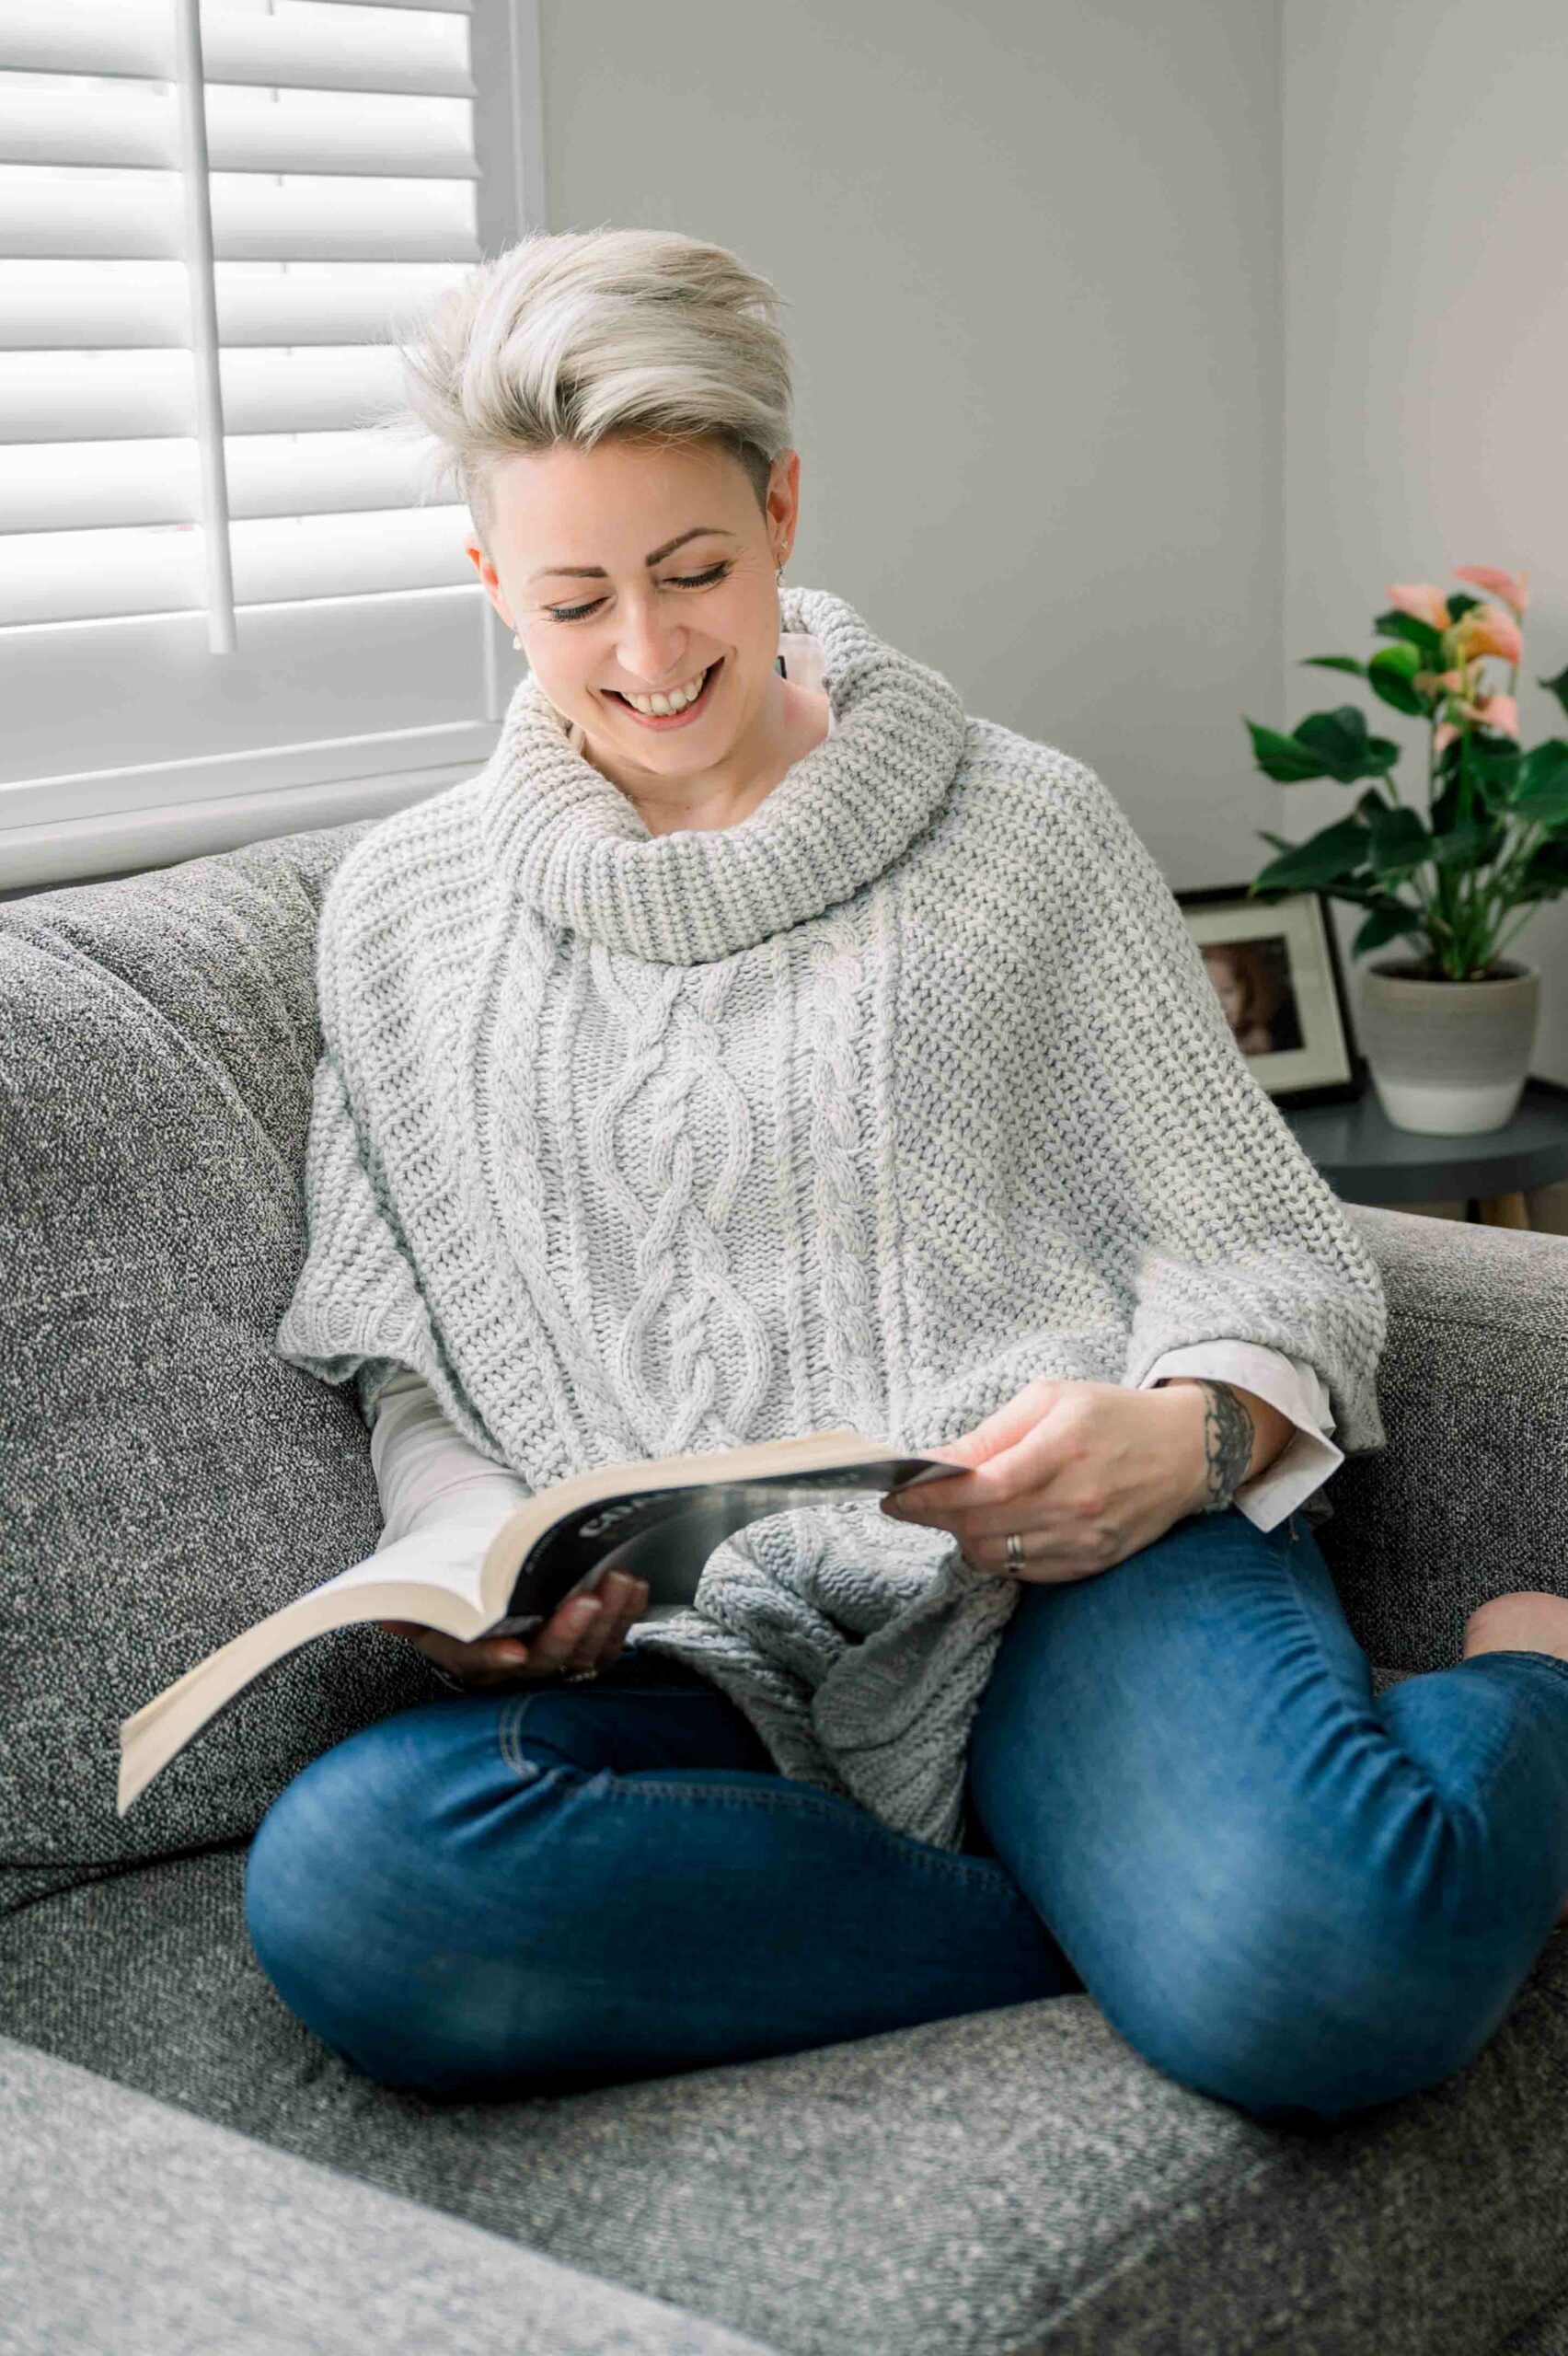 smiling woman with short blonde hair sitting on her sofa reading a book